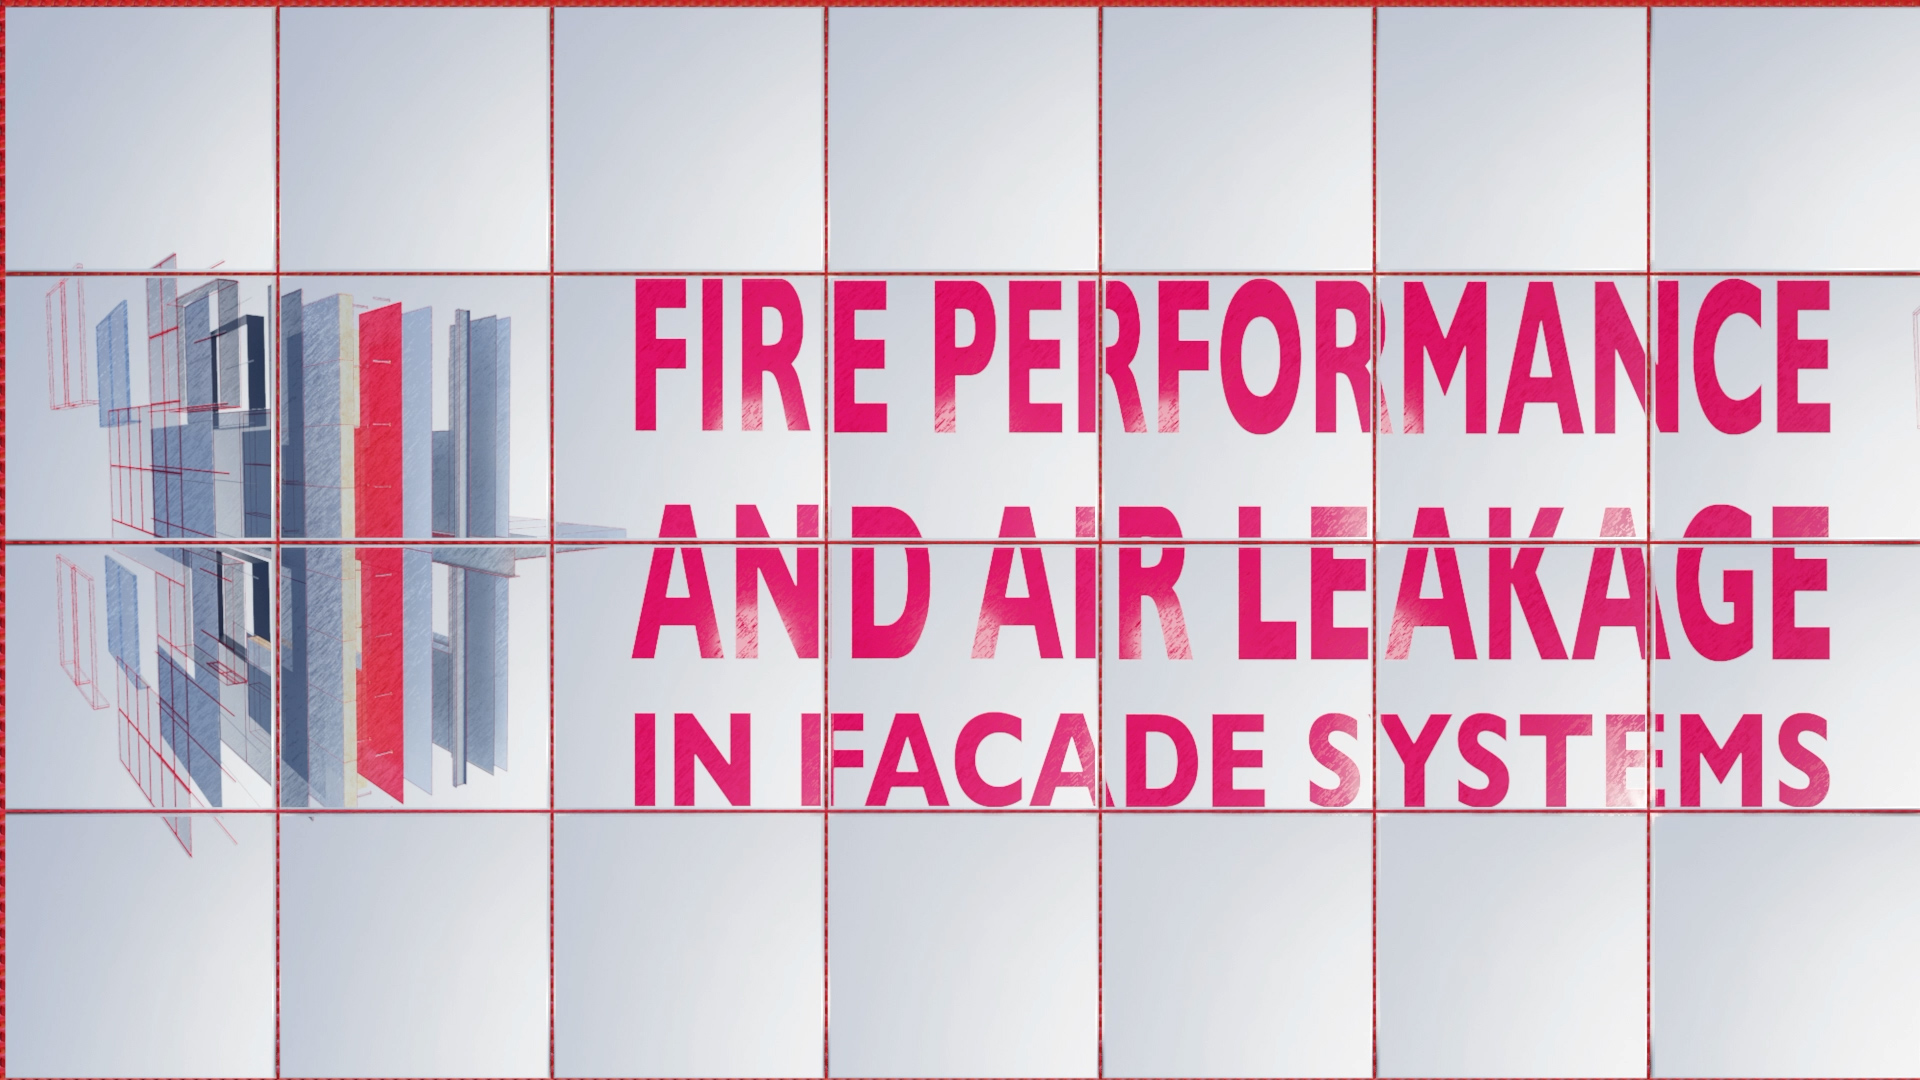 This webinar covers designing facade systems that limit air leakage and meet fire protection requirements, including a look at the relevant sections of the building regulations across UK & Ireland.